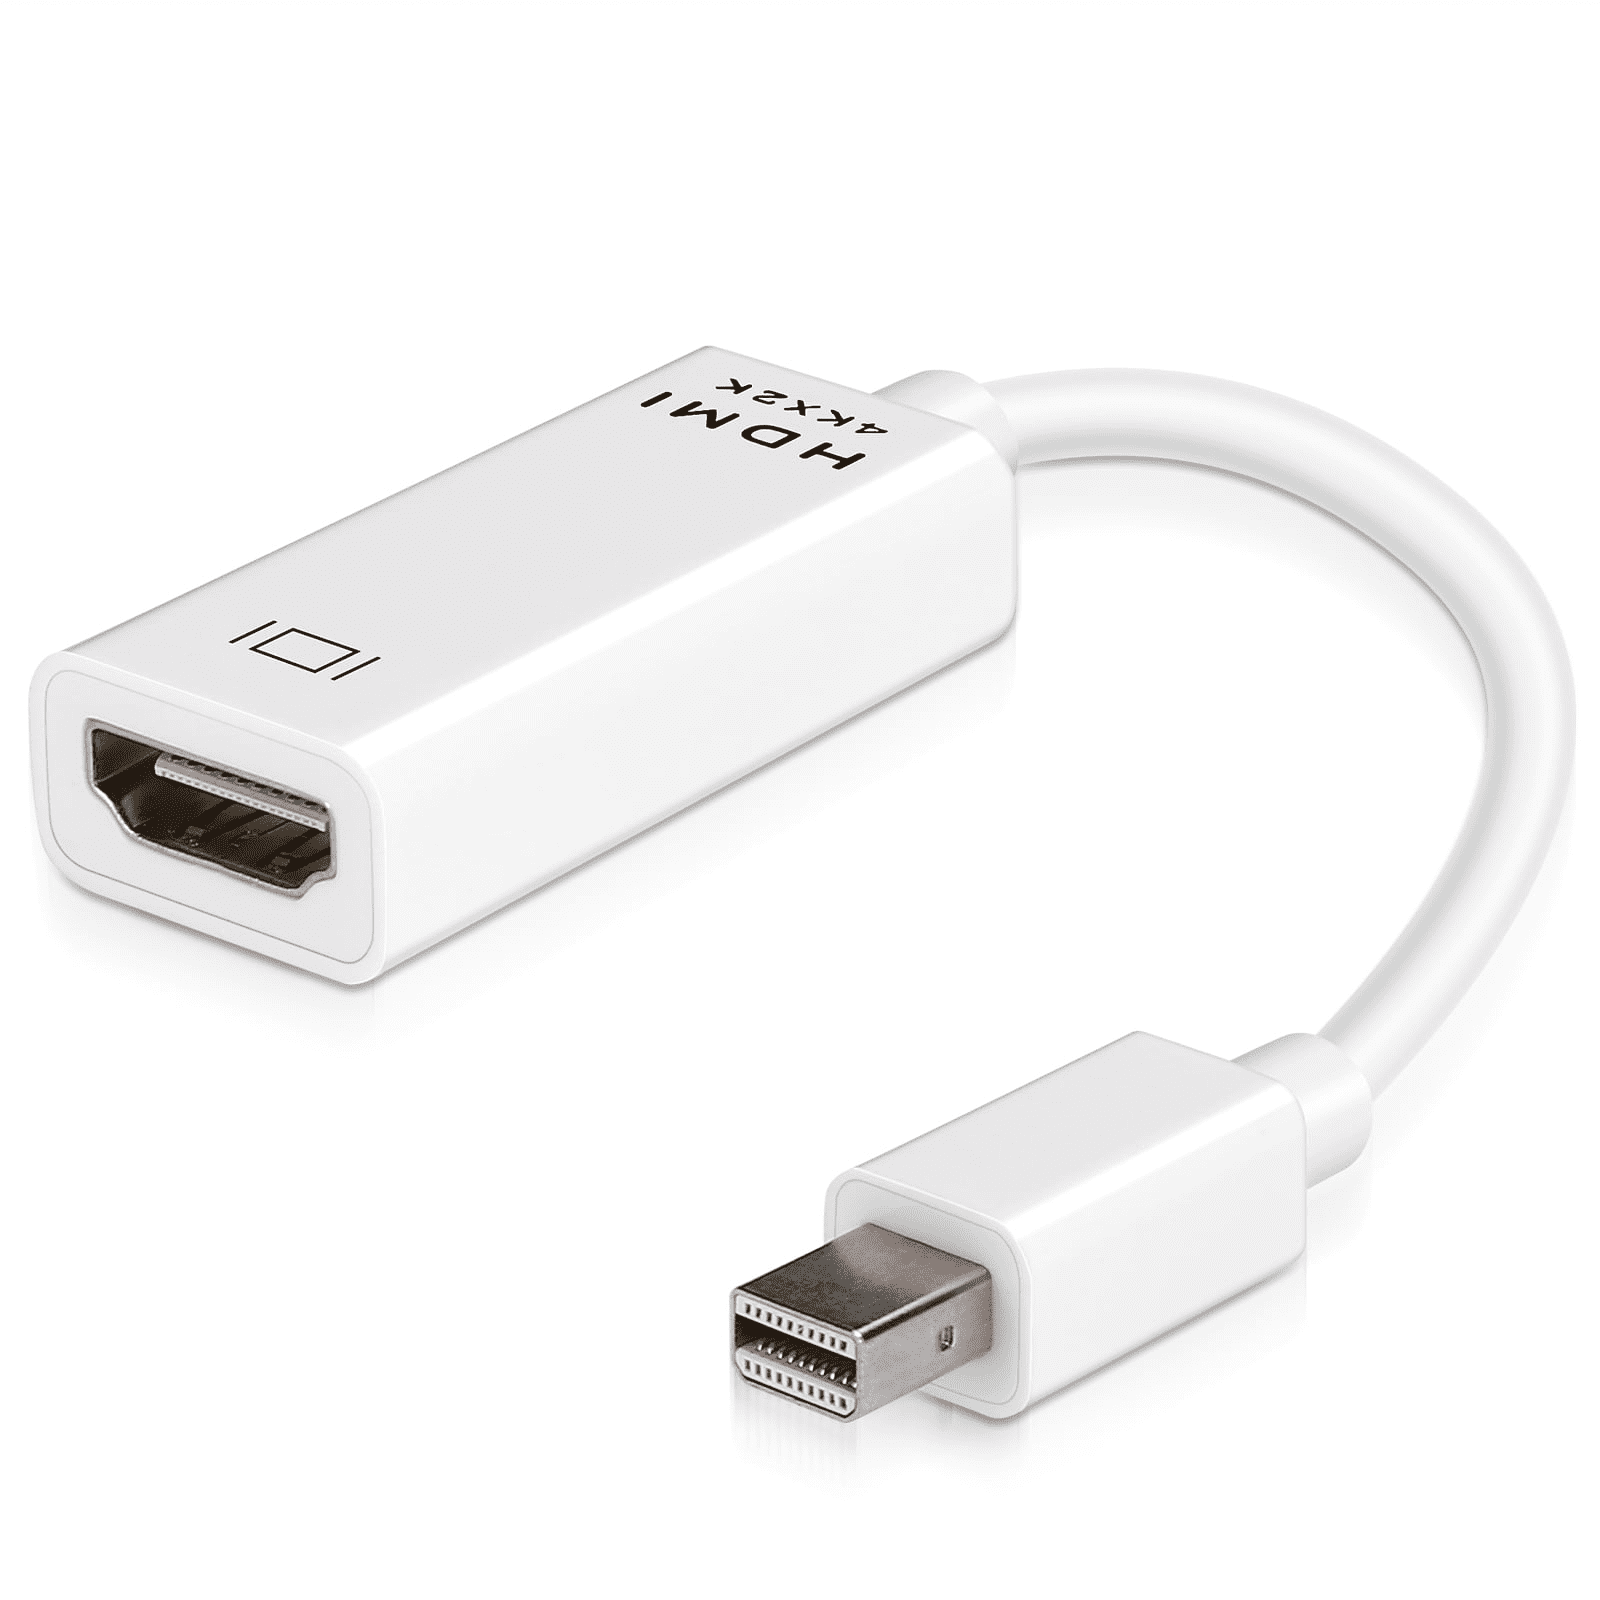 Mini to HDMI Adapter for iMac (BEFORE 2017) Mini DP to HDMI Adapter Compatible with MacBook Microsoft Surface Pro/Dock, Projector and More 2-Pack - Walmart.com